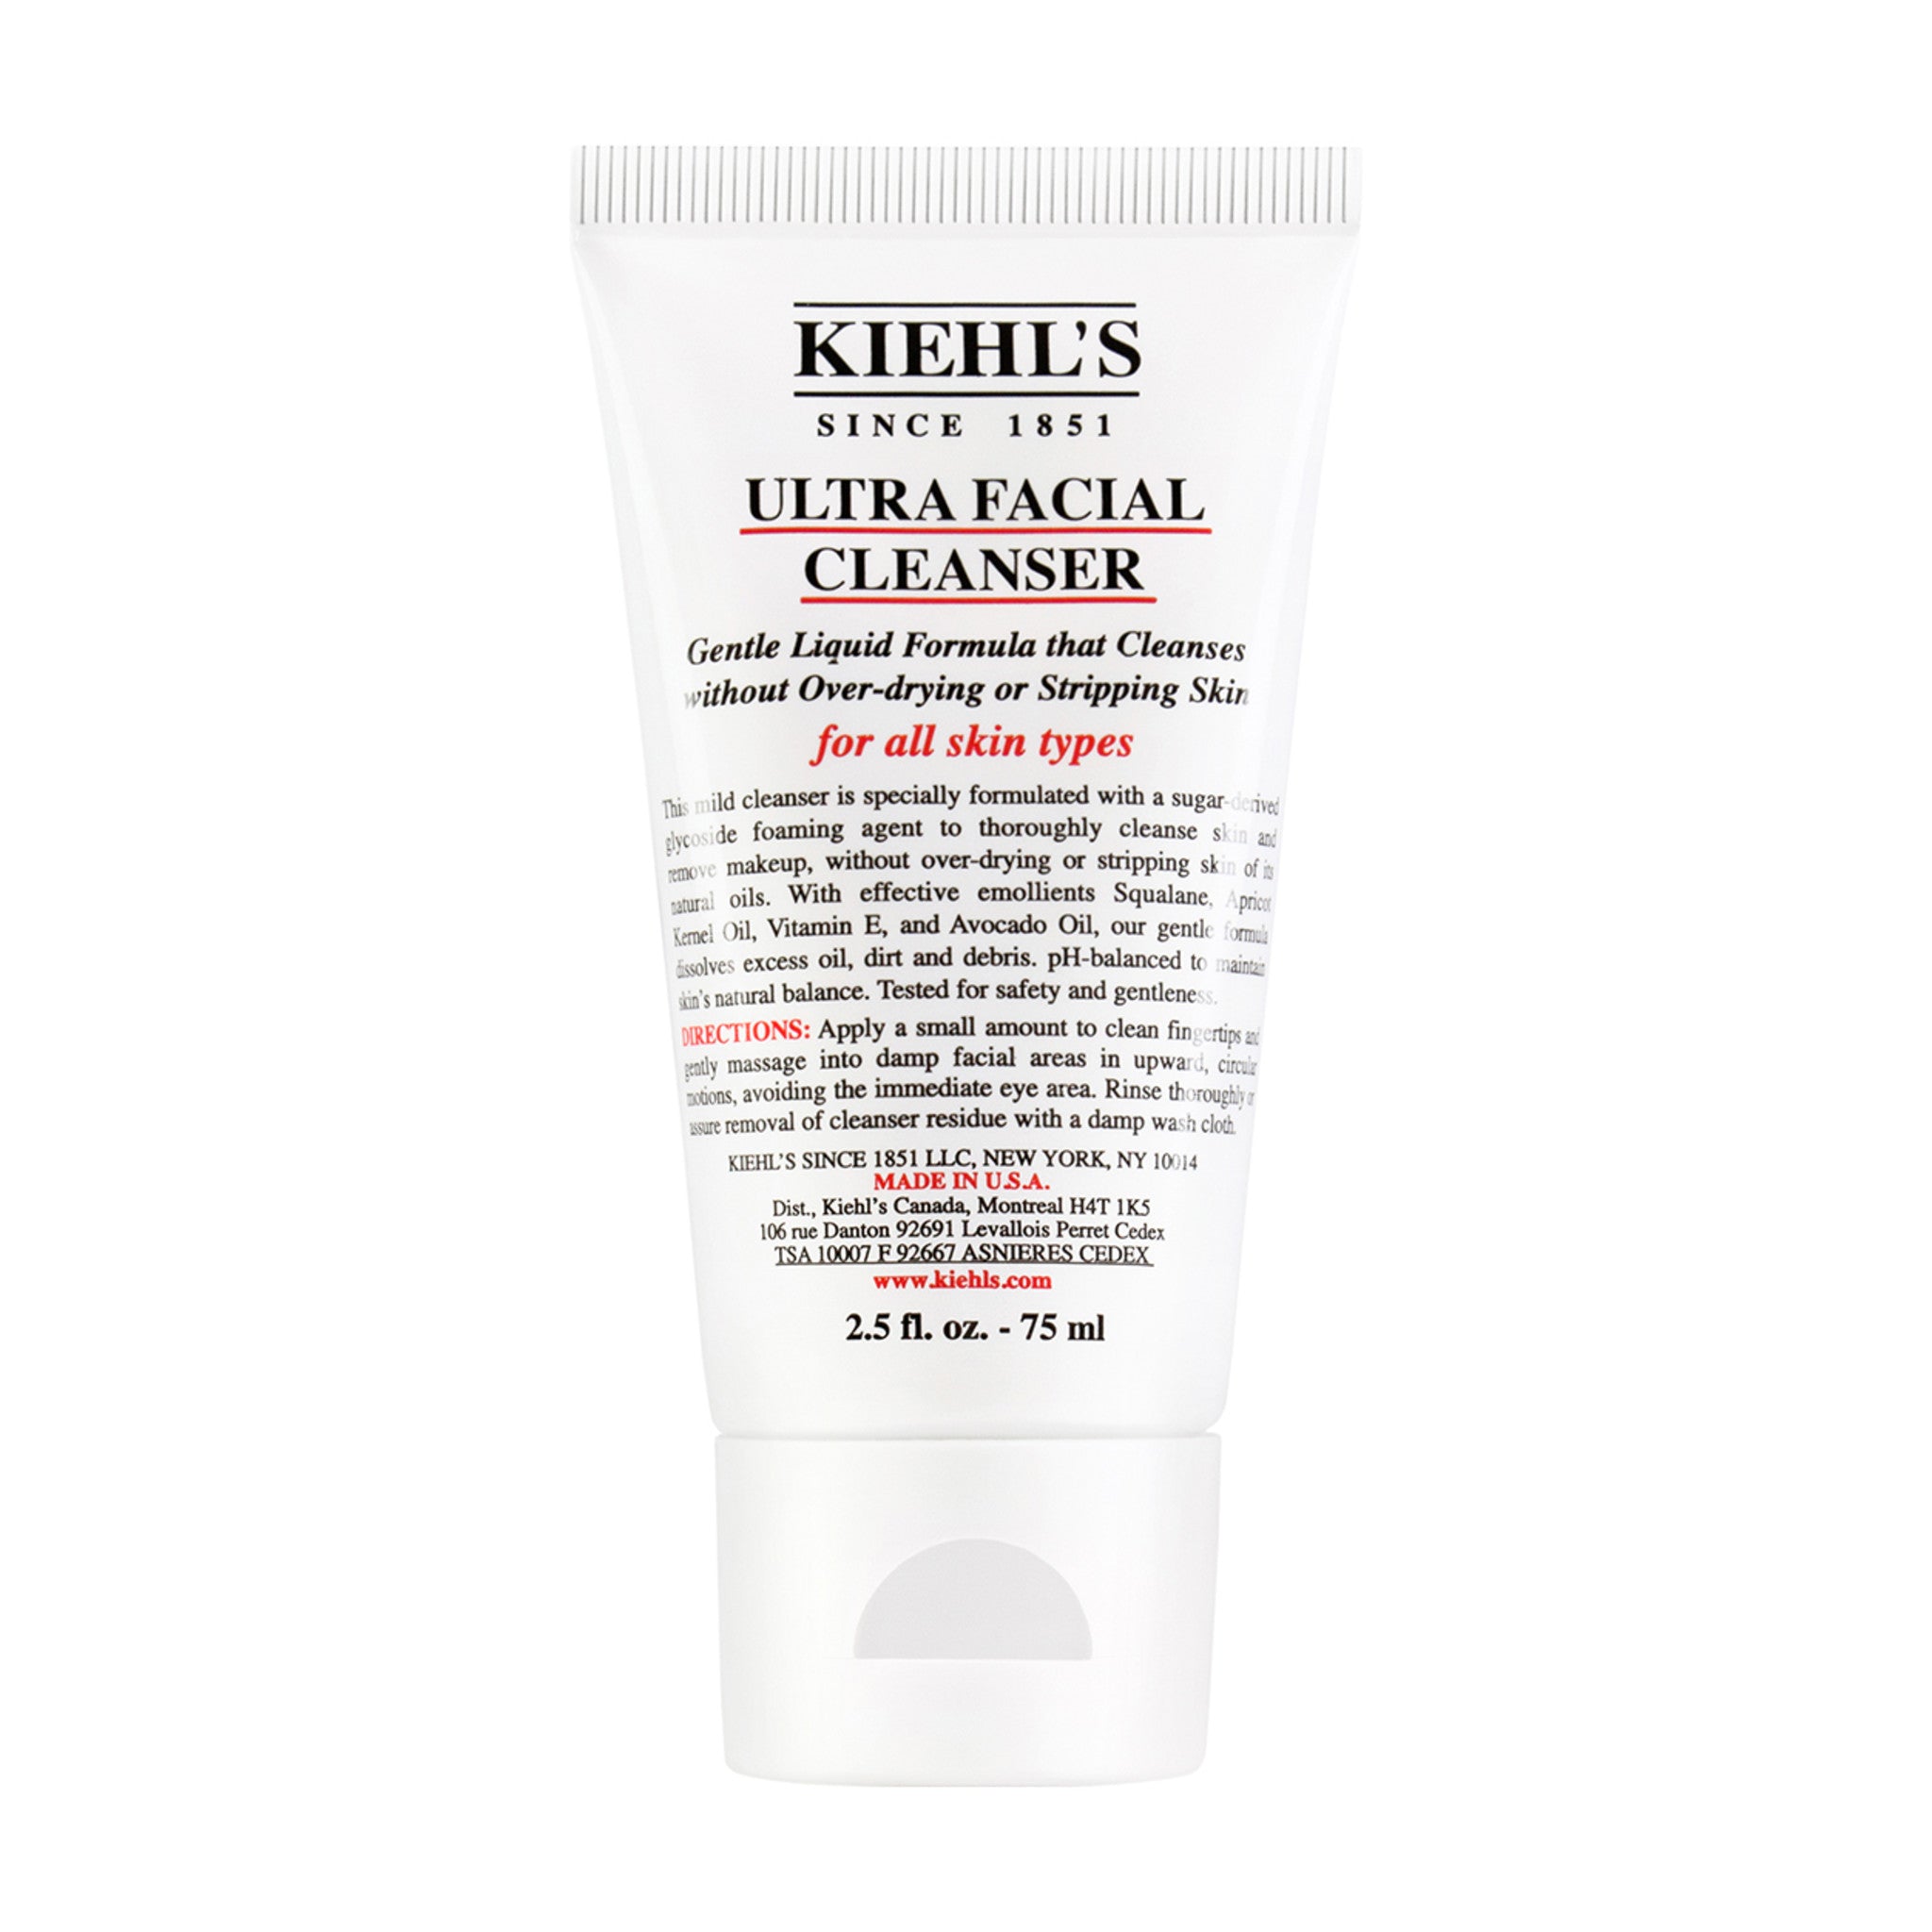 Kiehl's Since 1851 Ultra Facial Cleanser Size variant: 2.5 fl oz | 75 ml main image.